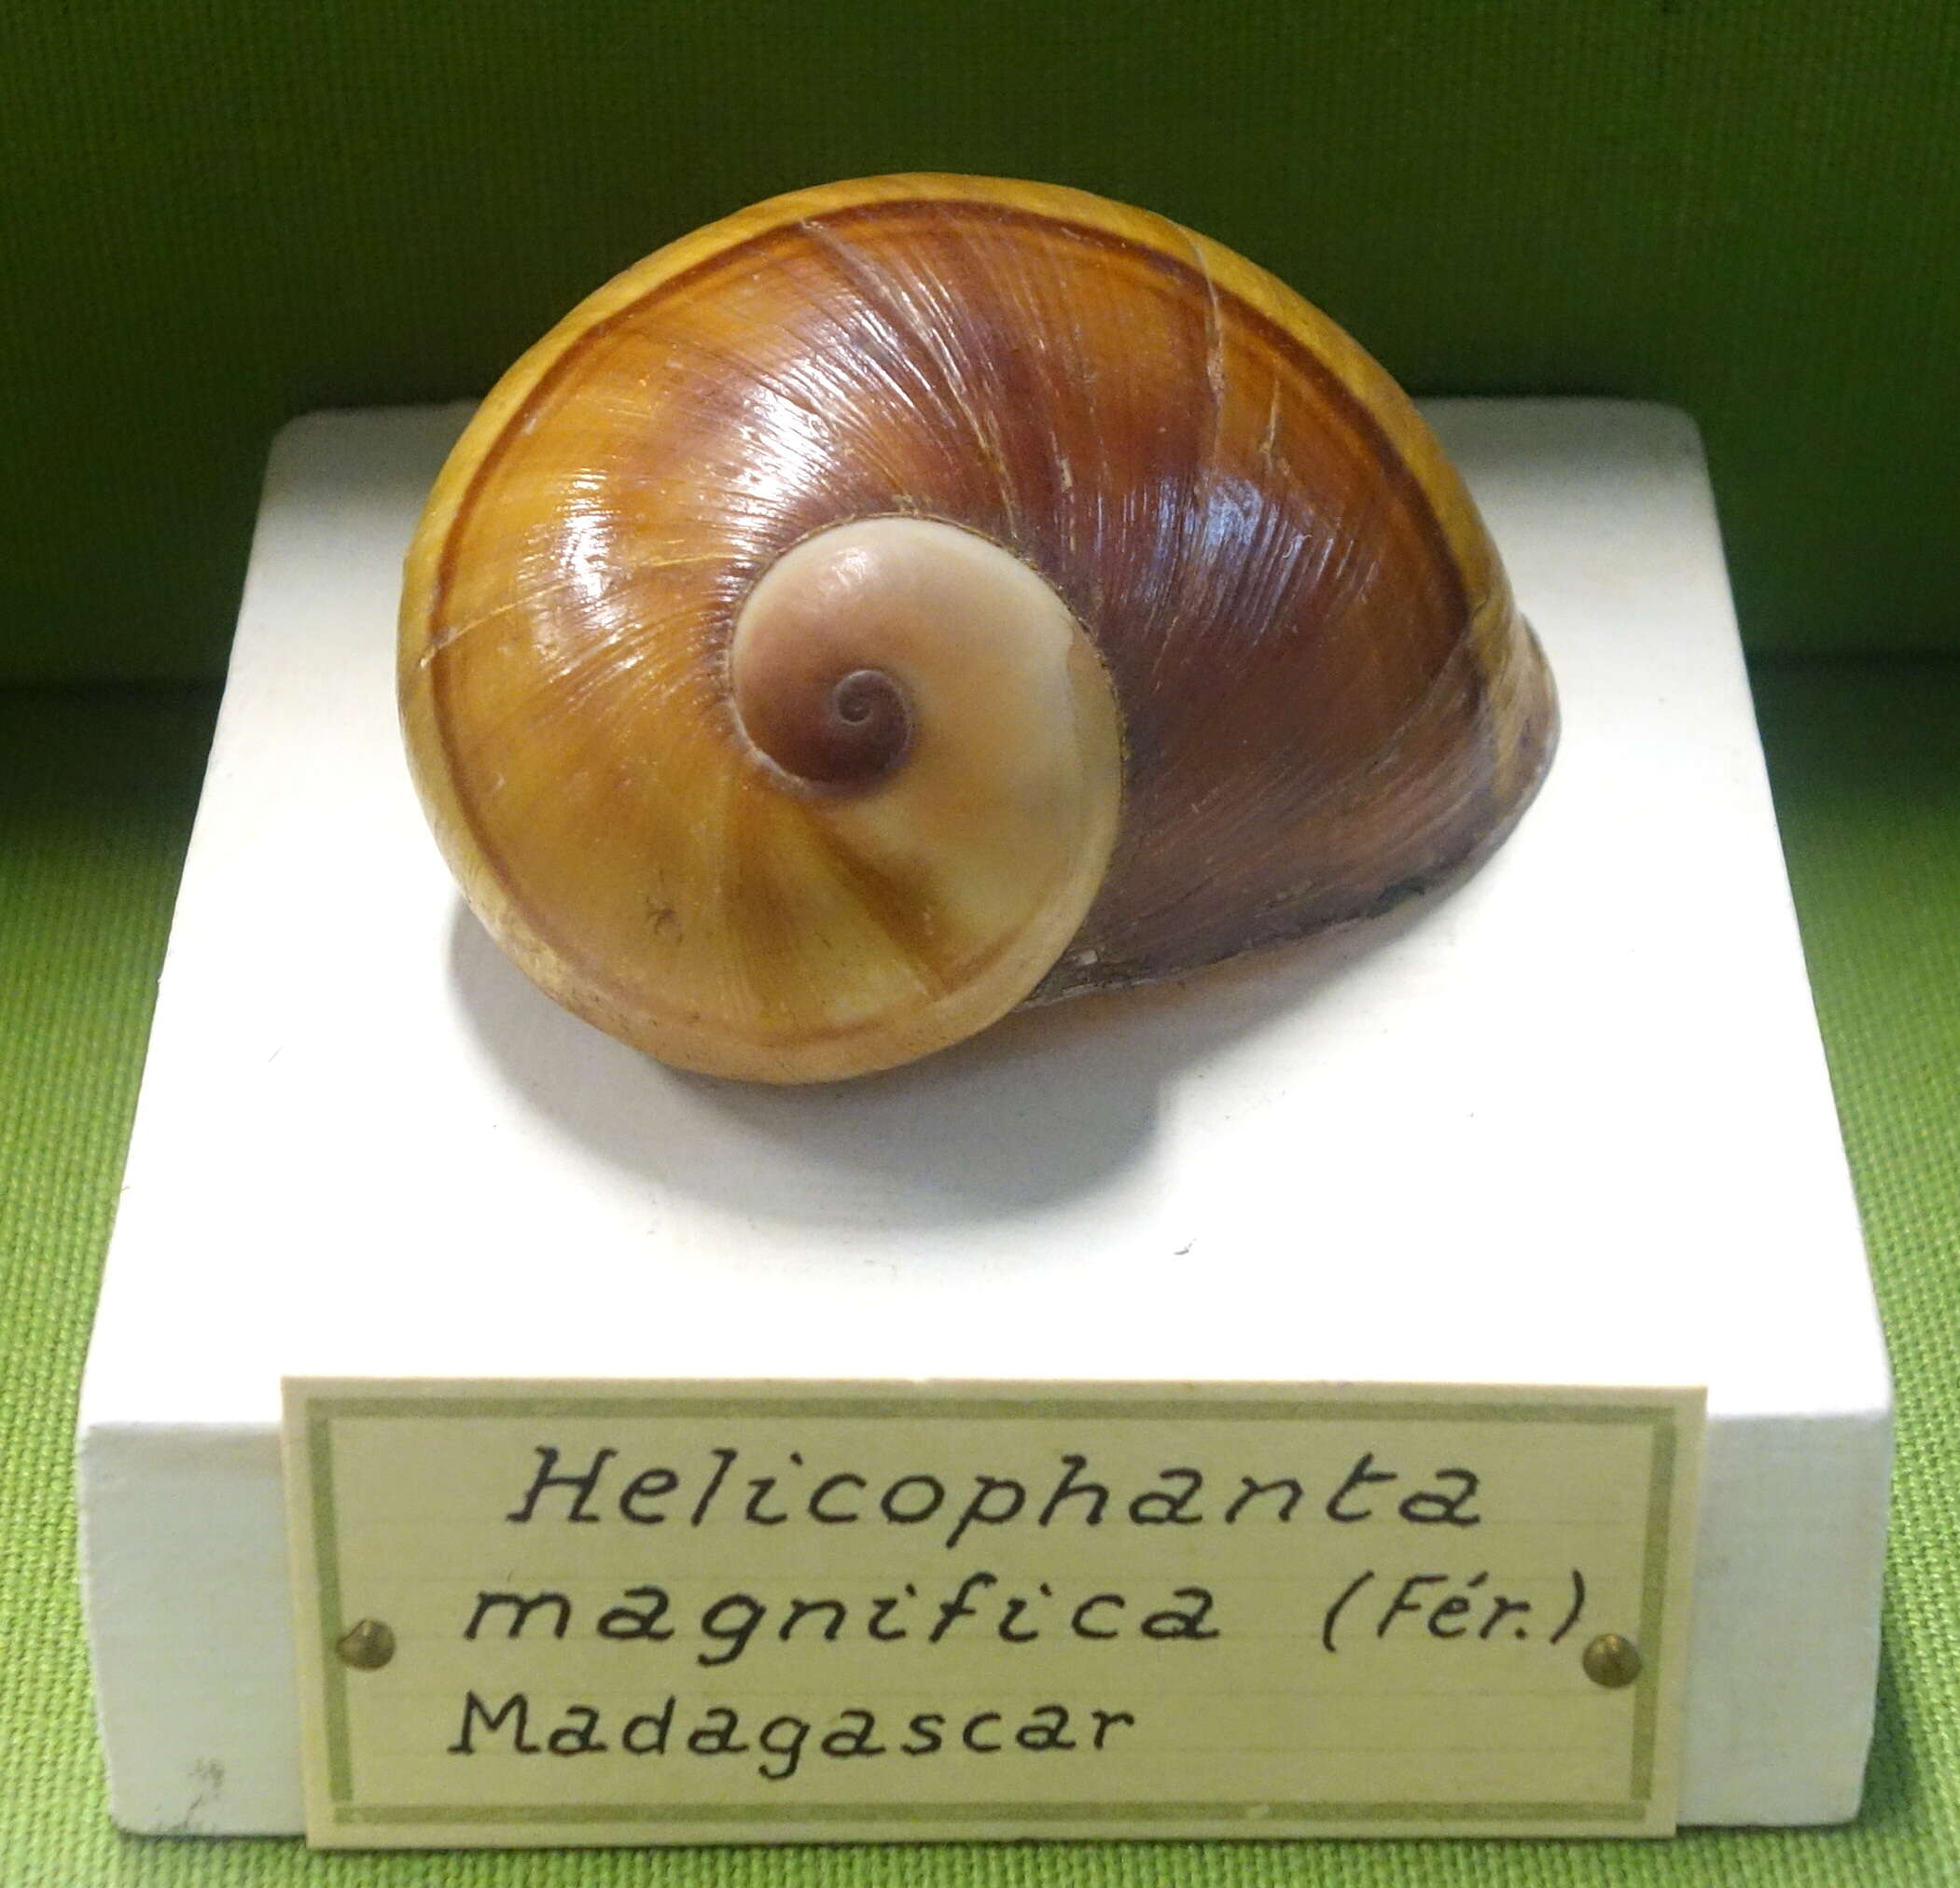 Image of Helicophanta magnifica Férussac 1819